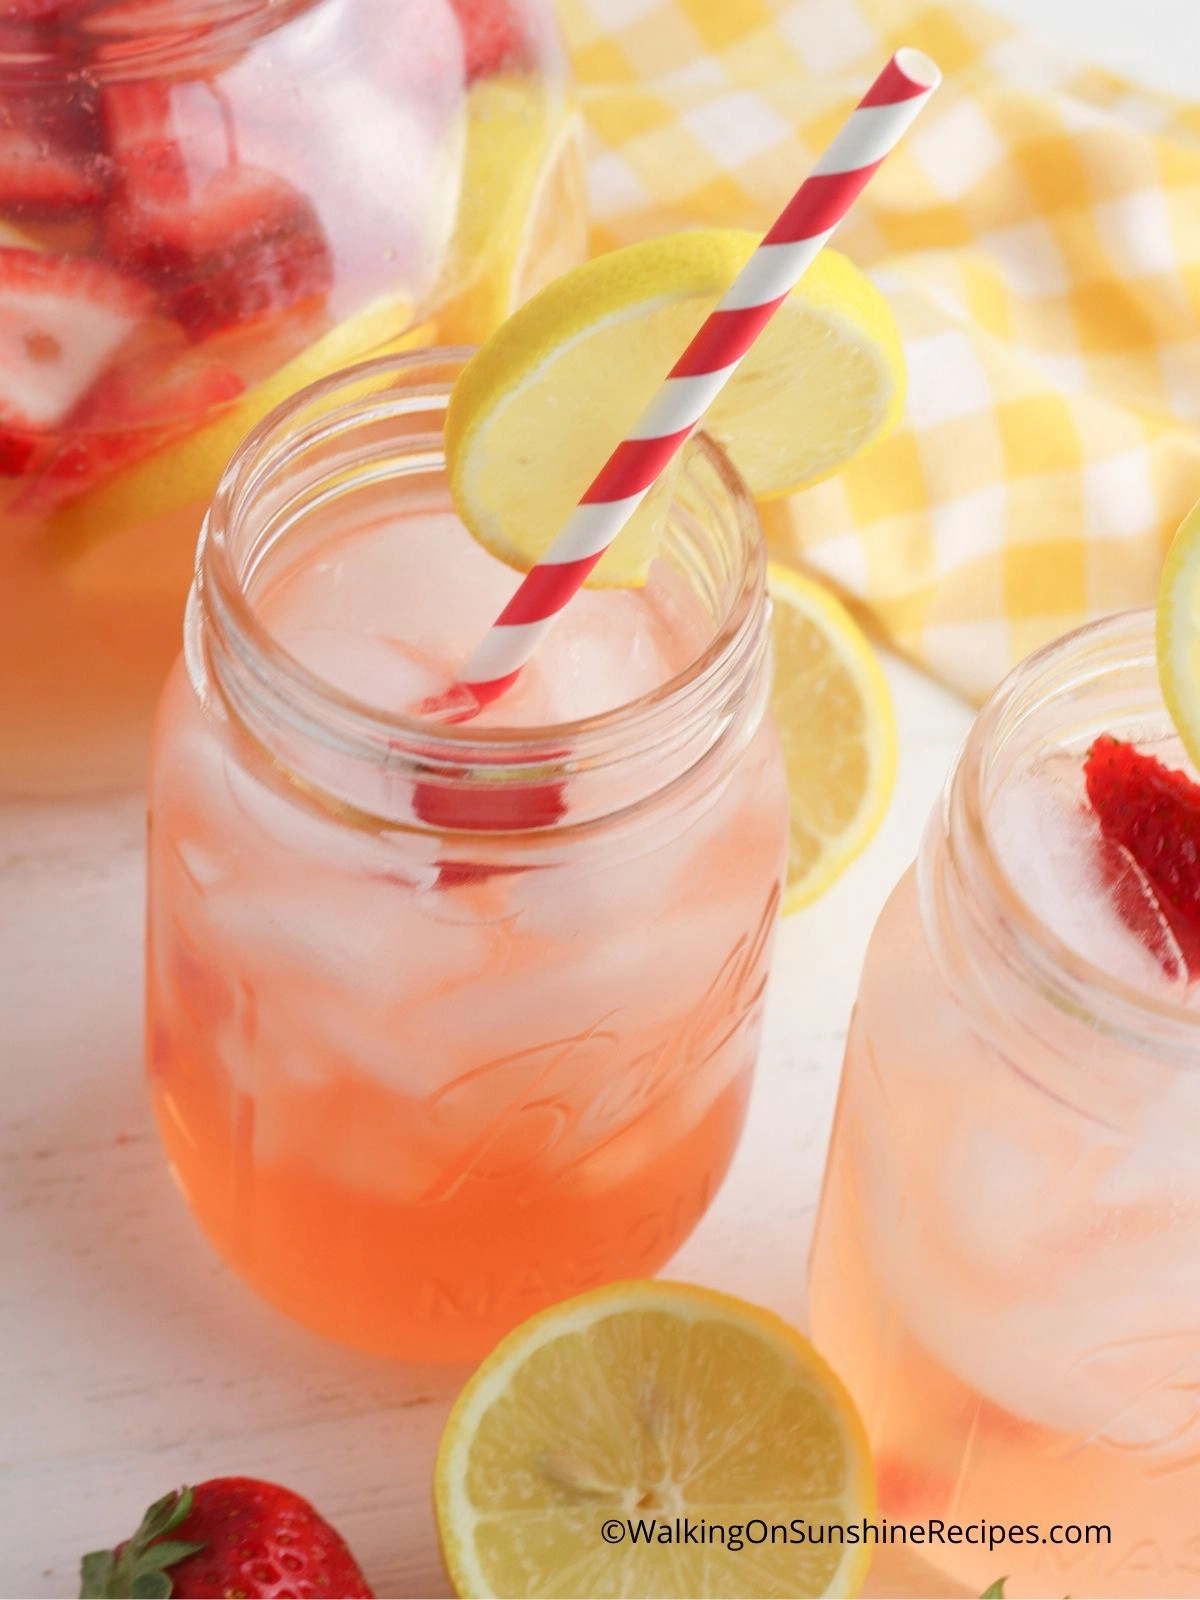 Infused strawberry lemonade in mason jars with red and white striped straws